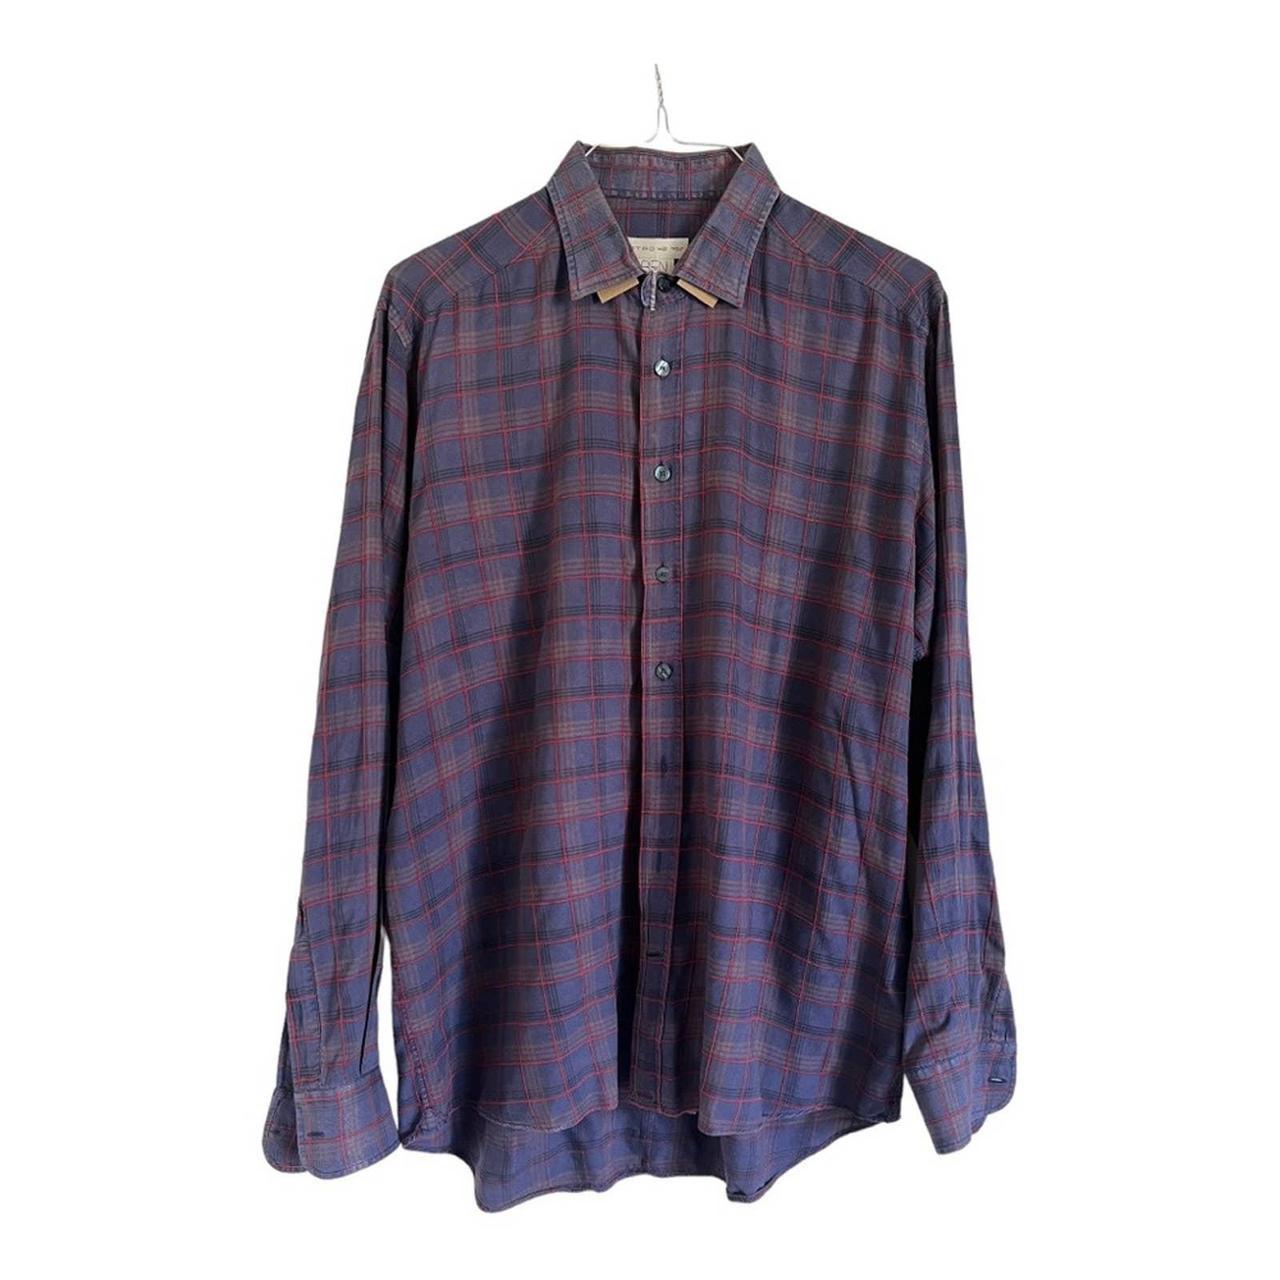 Etro Men's Blue and Red Shirt